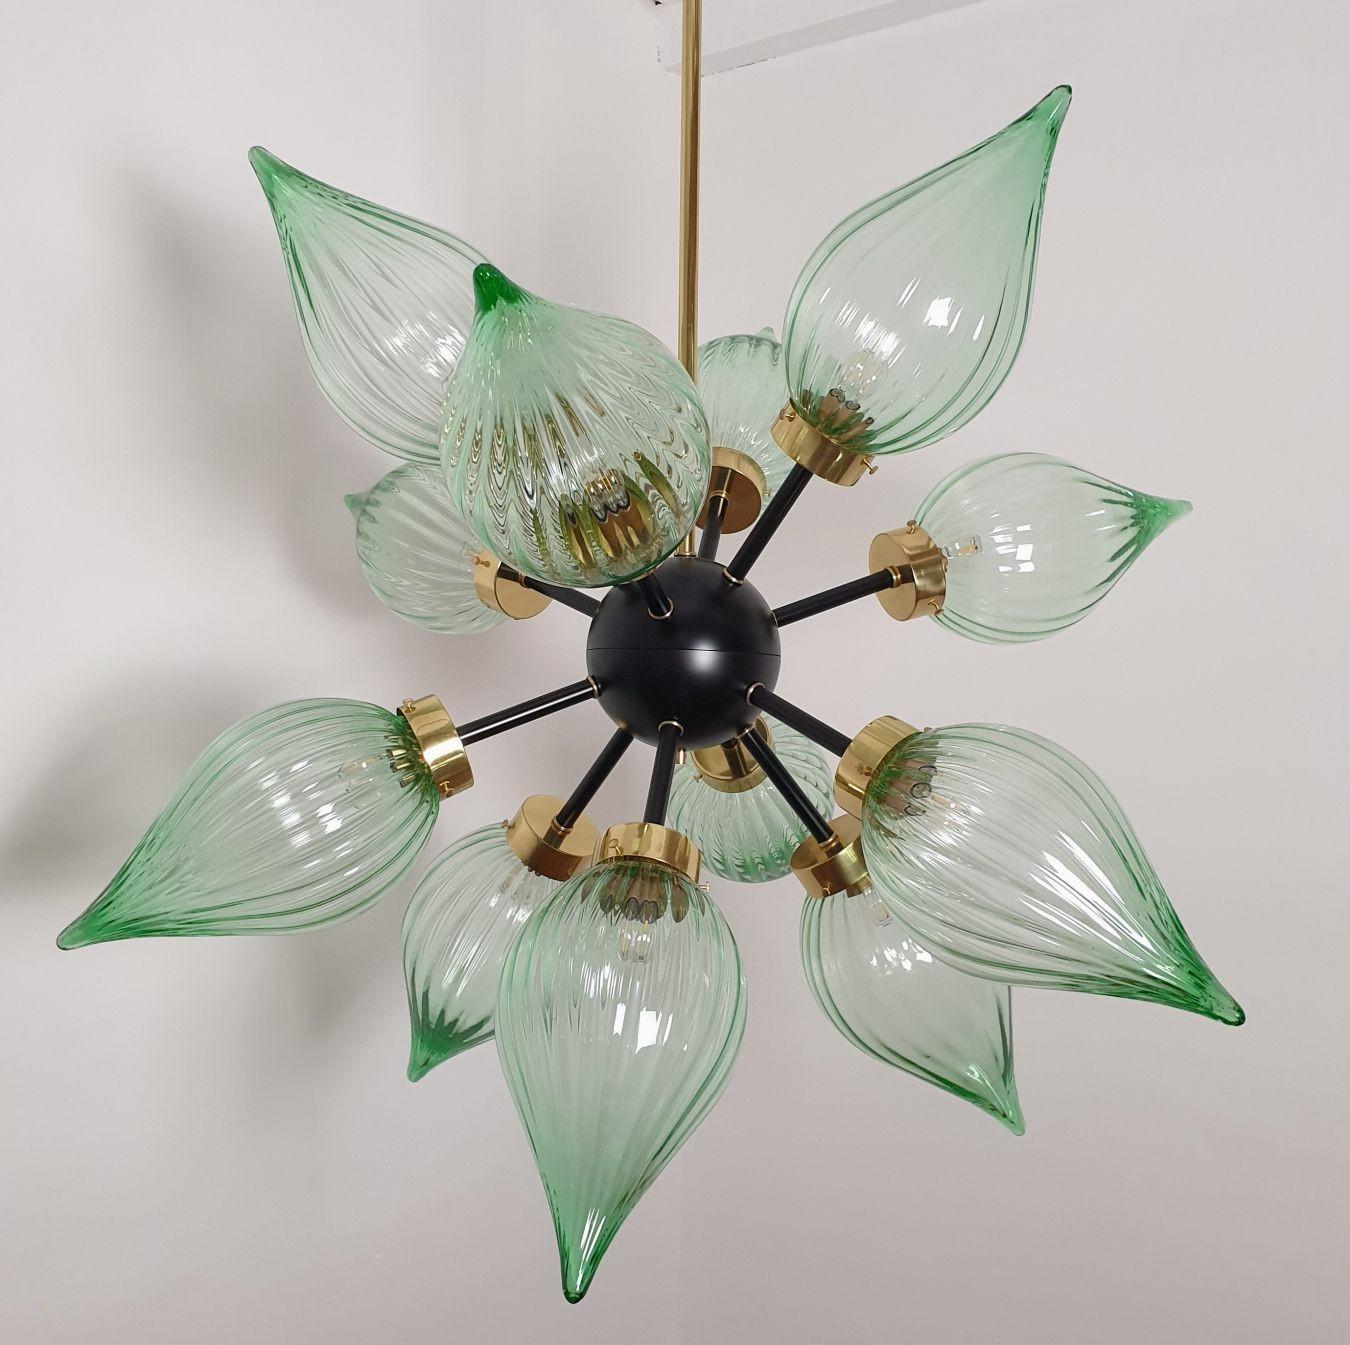 Extra large Mid-Century Modern Murano glass sputnik chandelier, Barovier style, Italy 1990s.
The large spherical chandelier is made of a black enamel center stem, brass glass holders and light green Murano glasses.
The chandelier has 12 lights /